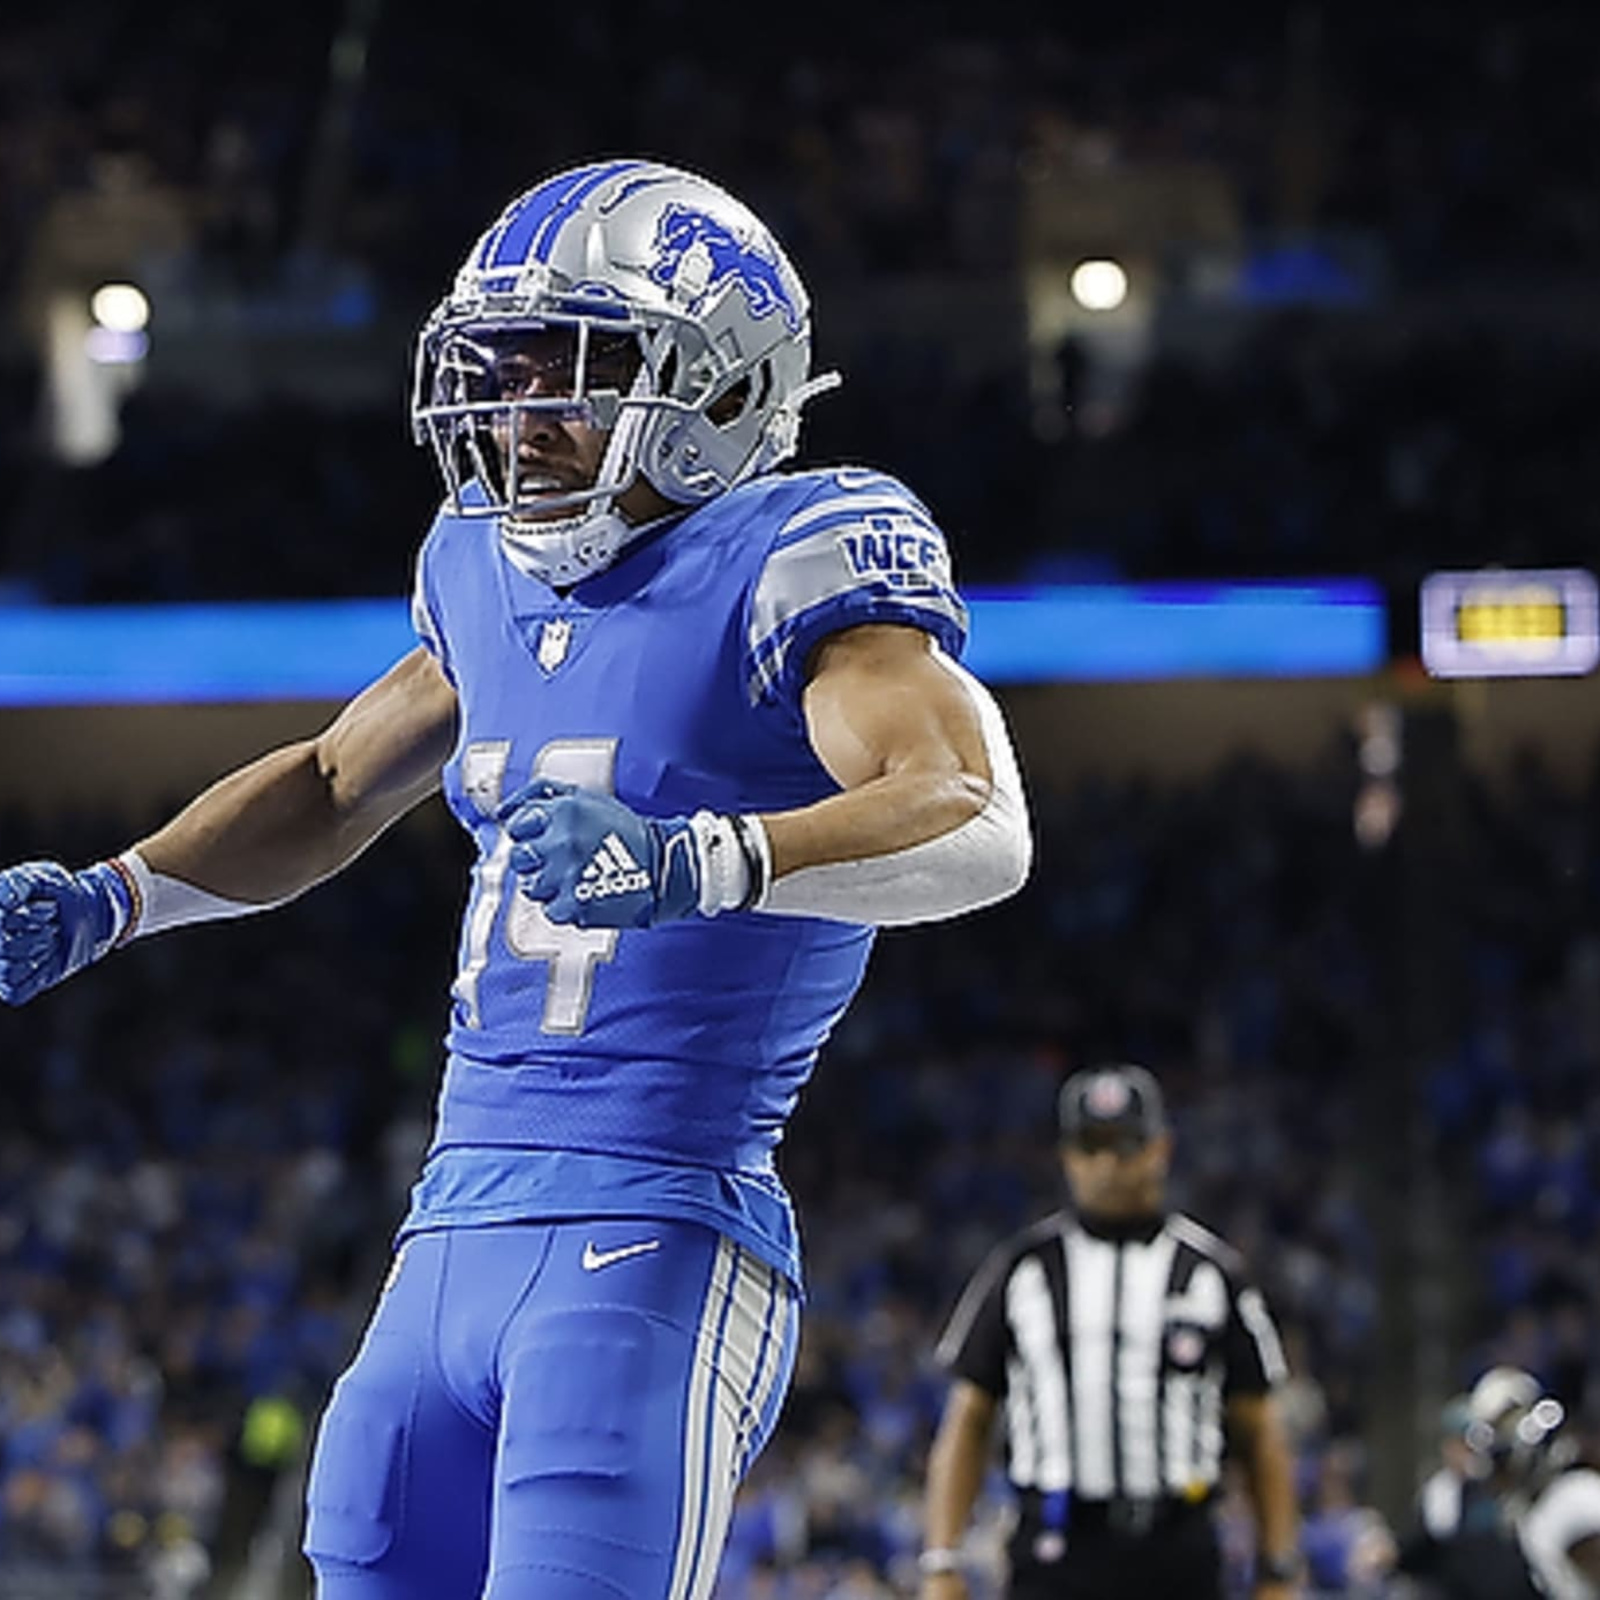 Best DraftKings NFL Player Specials - Top Futures for the 2023 Season